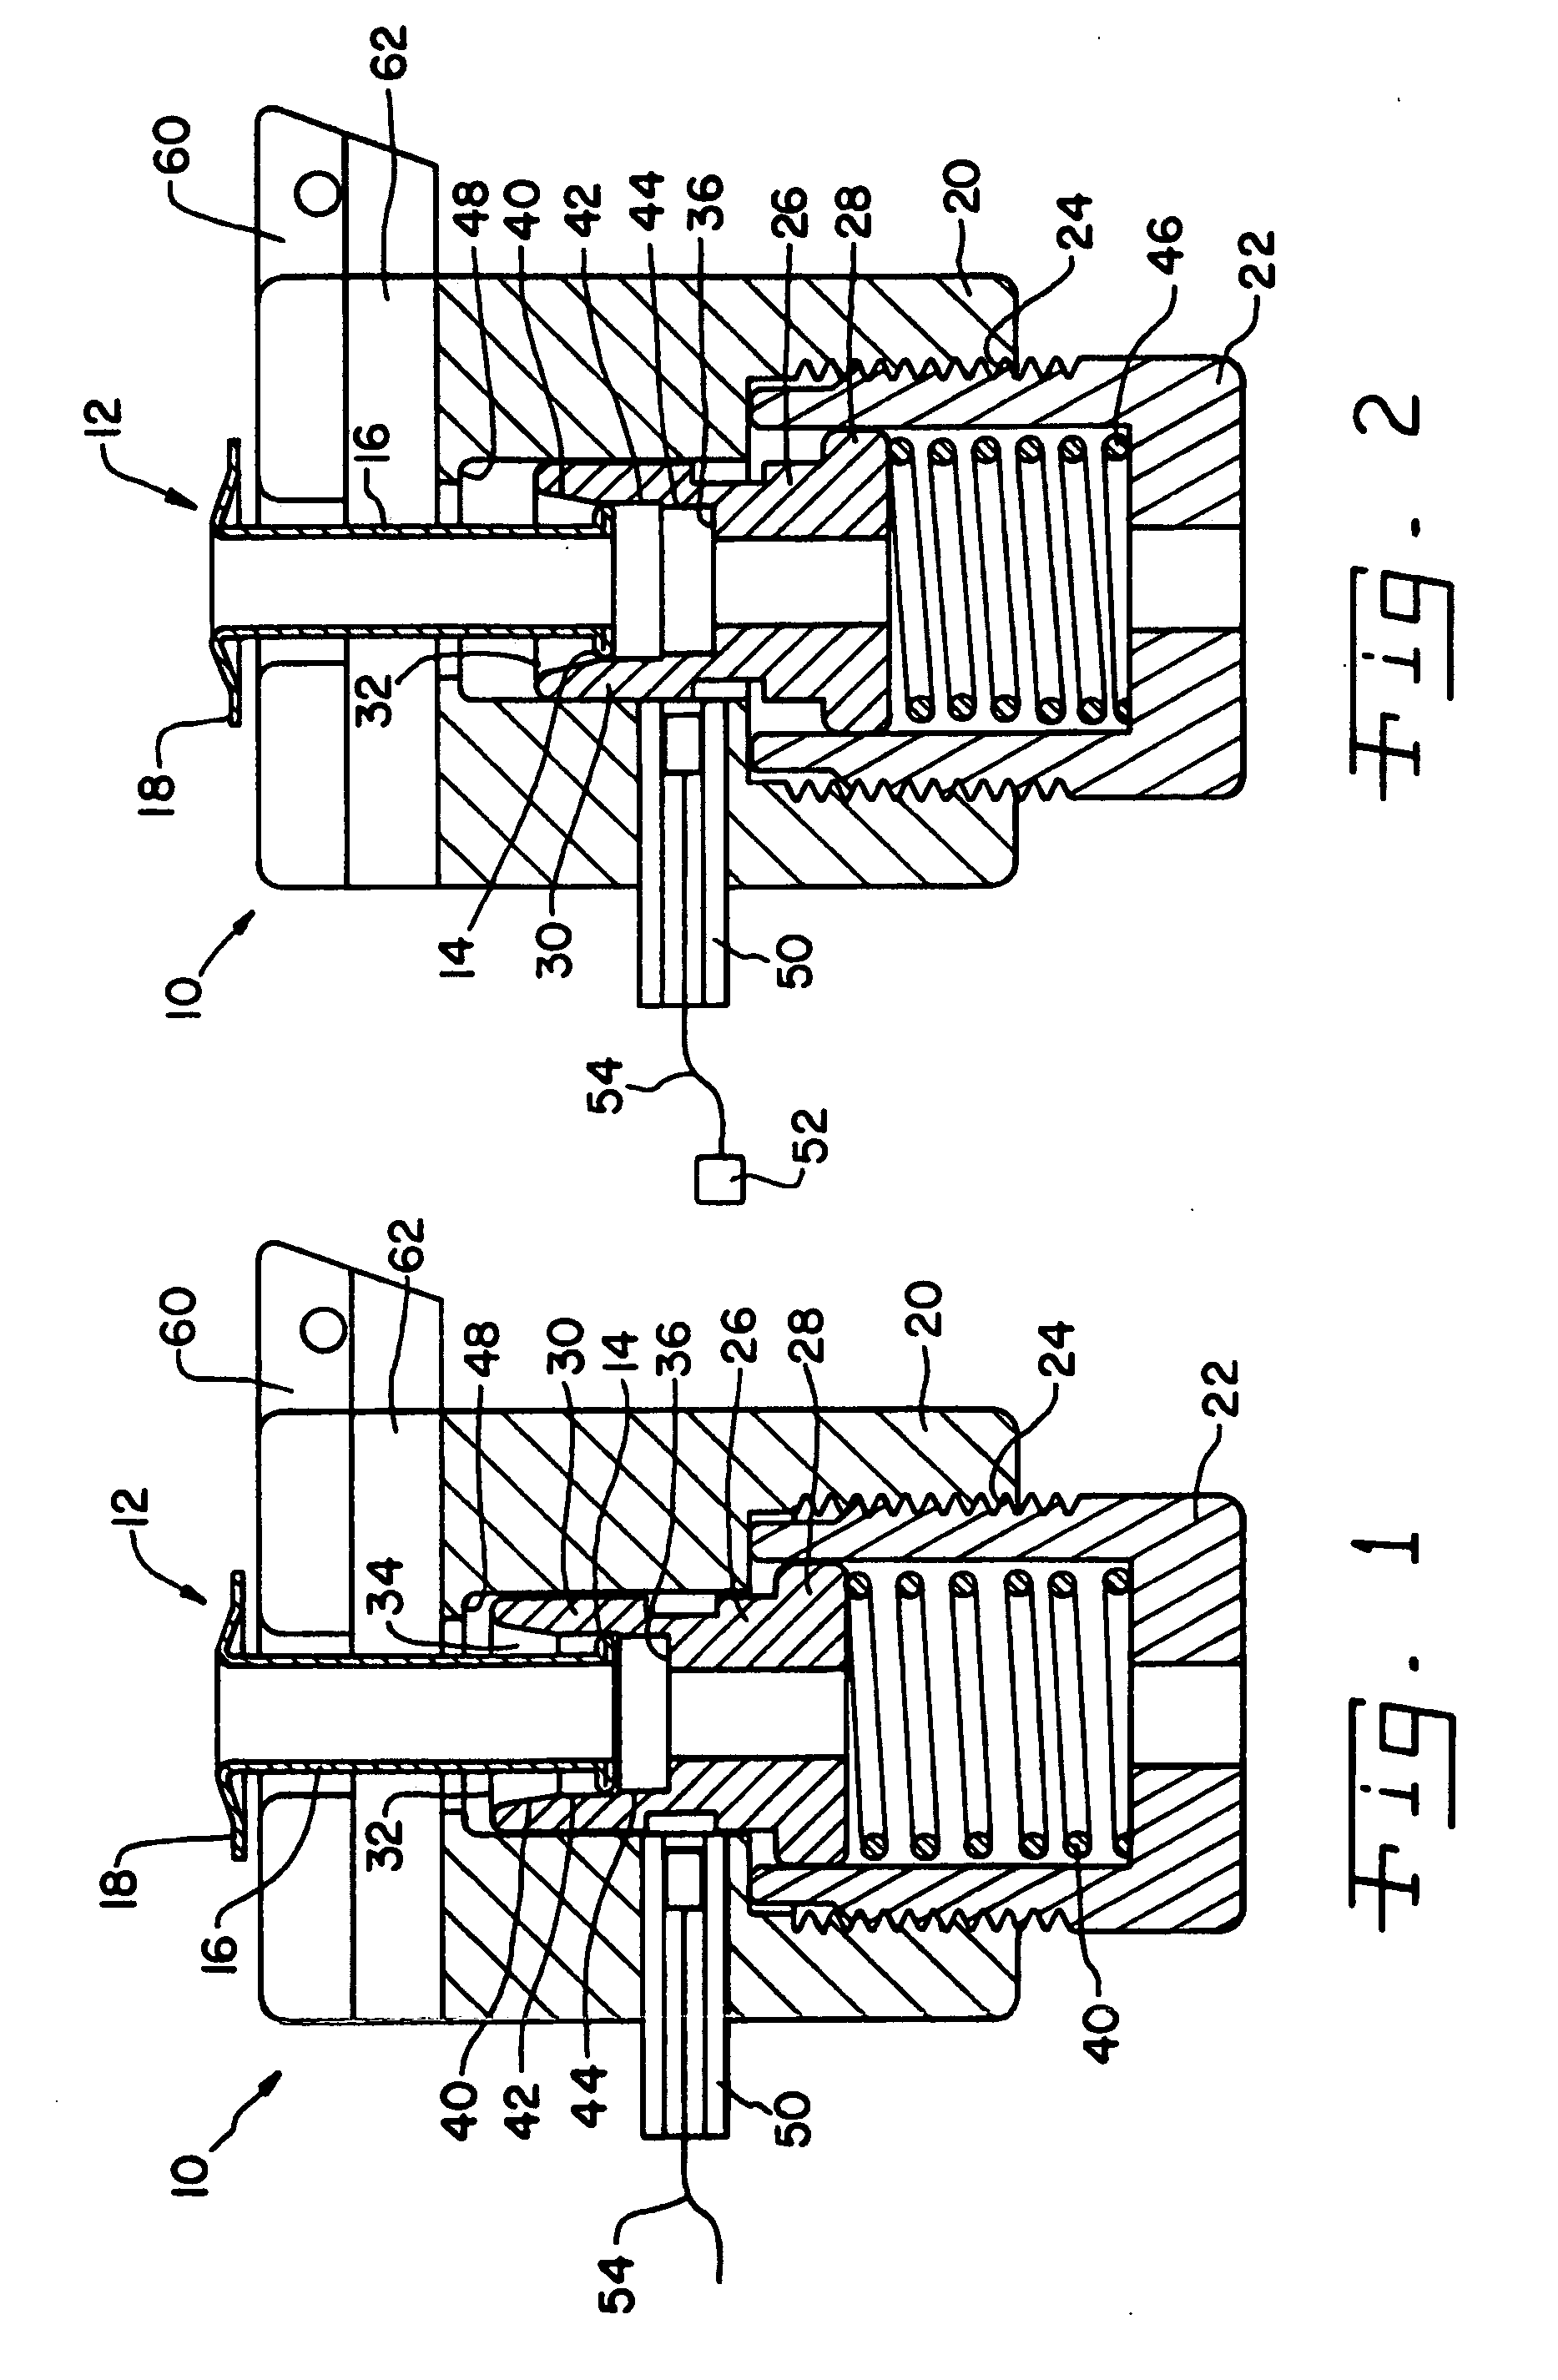 Measurement device and process